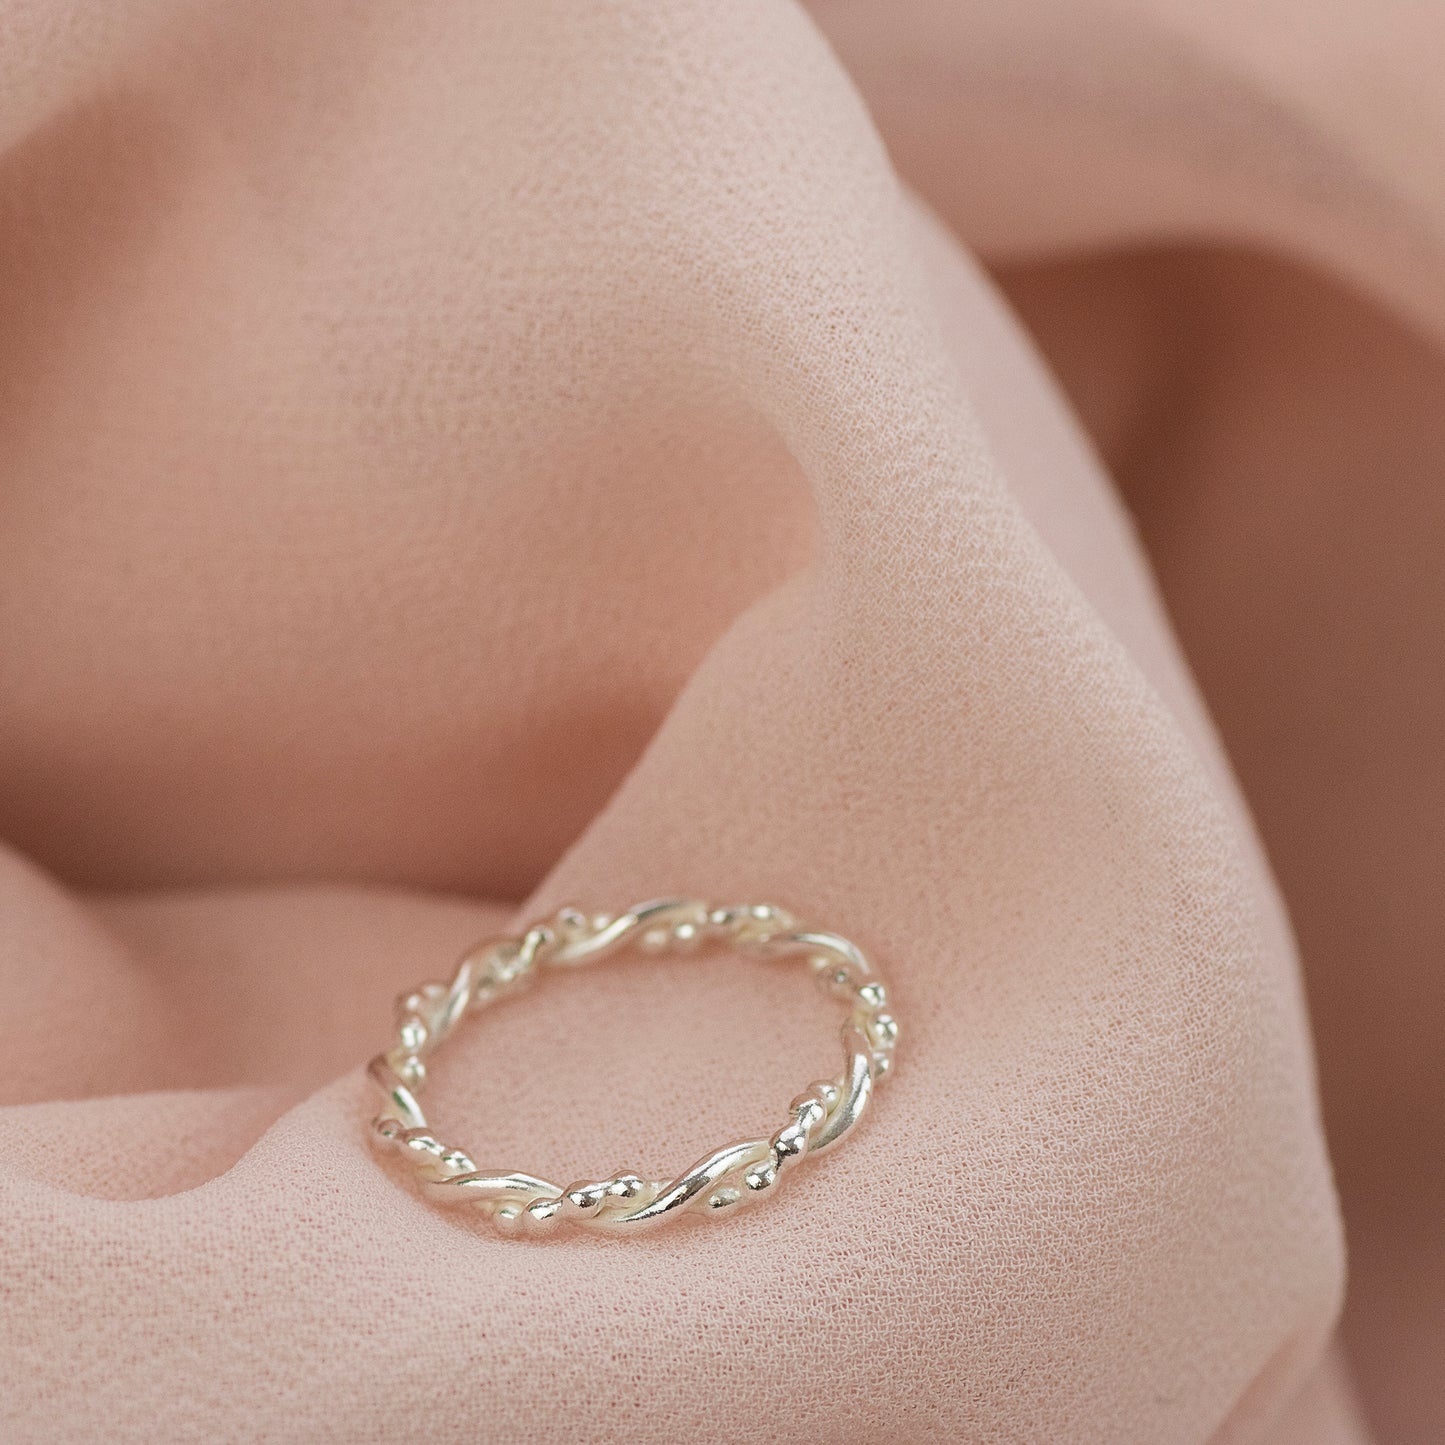 Entwined Ring - Silver - Linked for a Lifetime